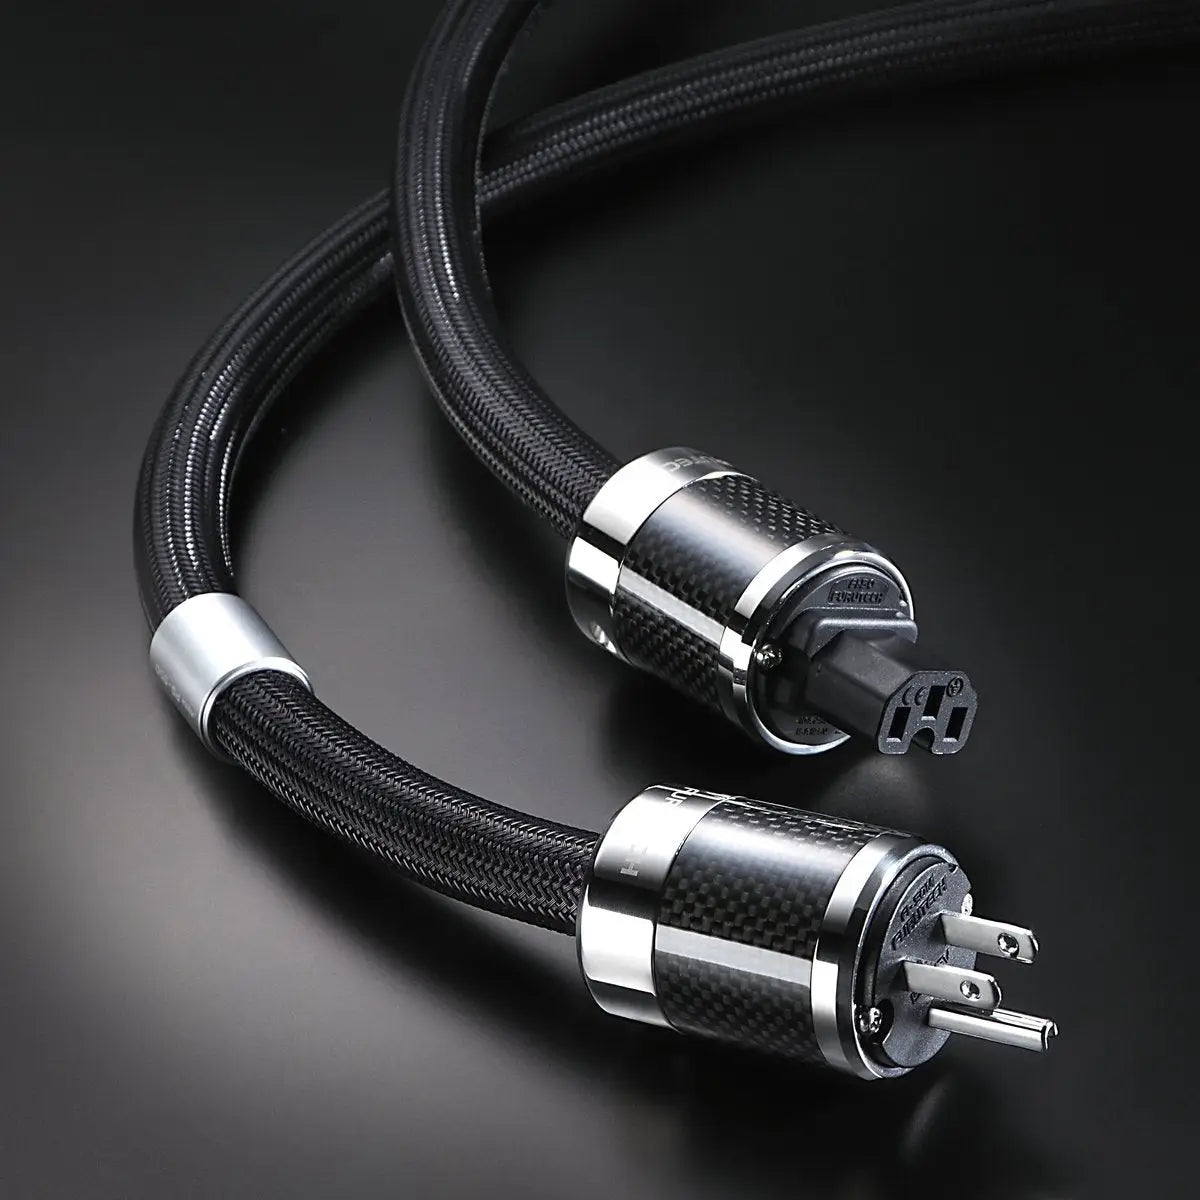 Cables for Audio & Video at Home - The Audio Co.